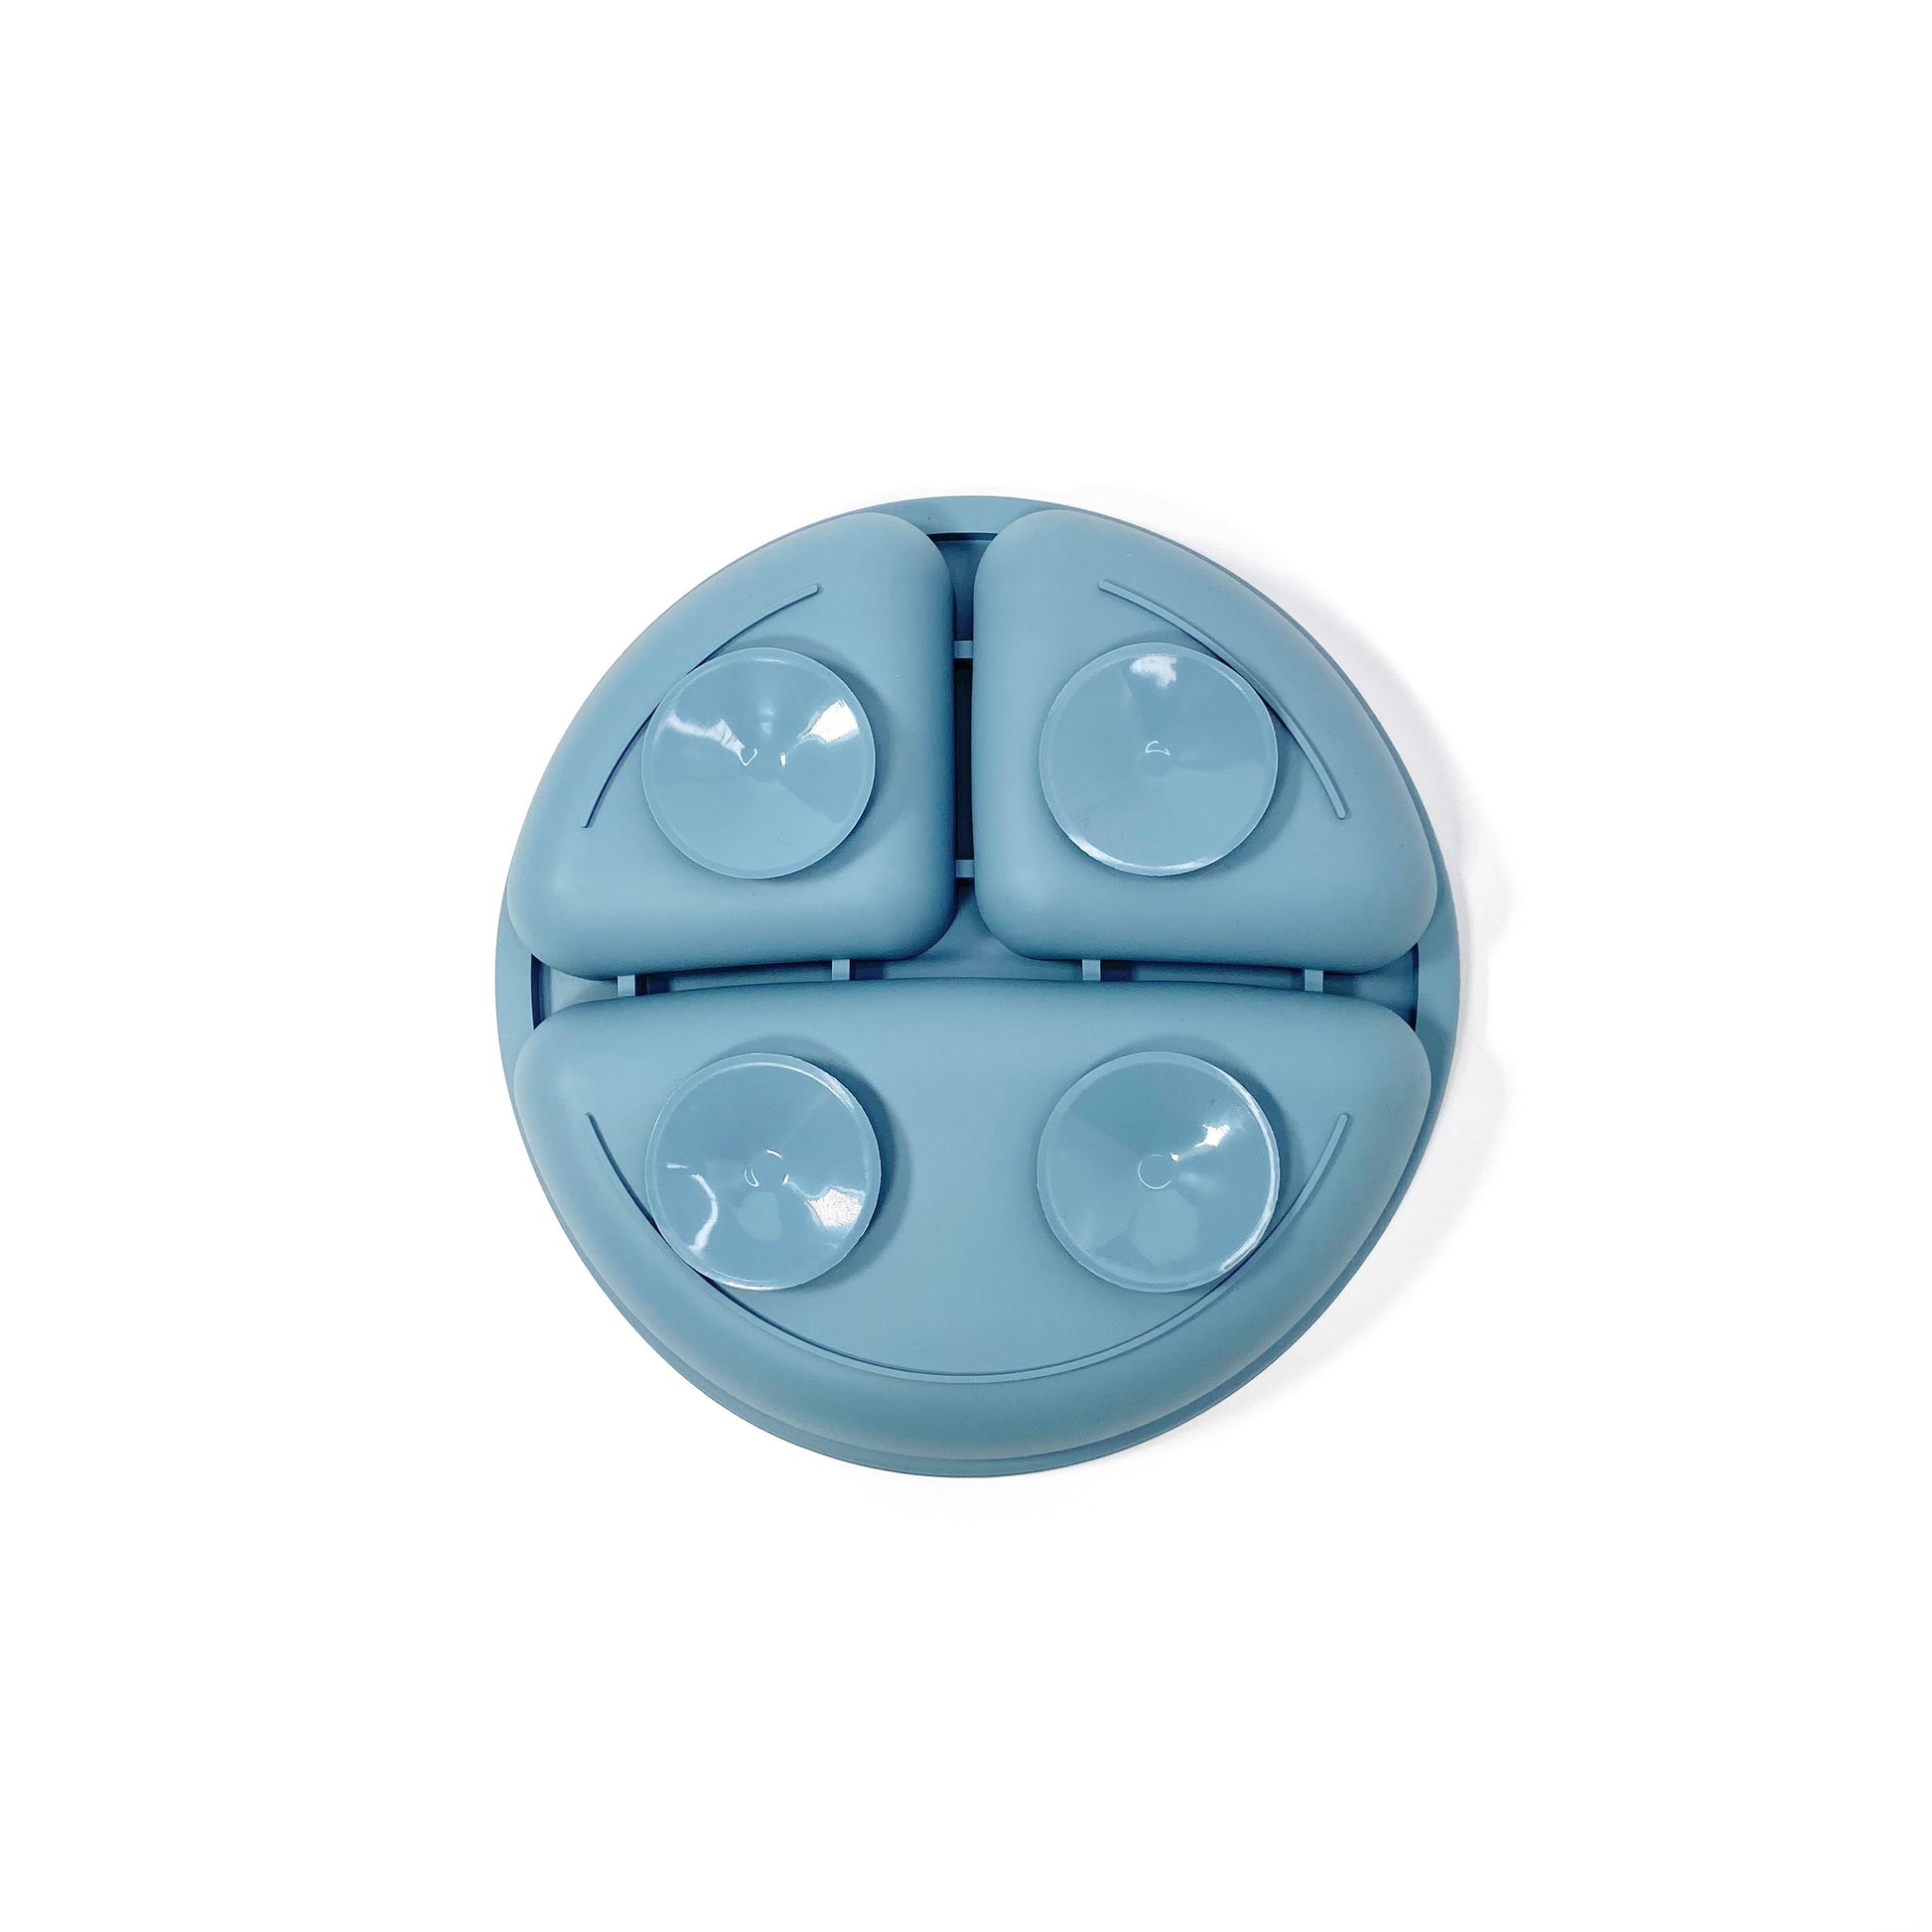 An ocean blue silicone children’s section plate with suction cups on the base. View shows the underside of the plate.